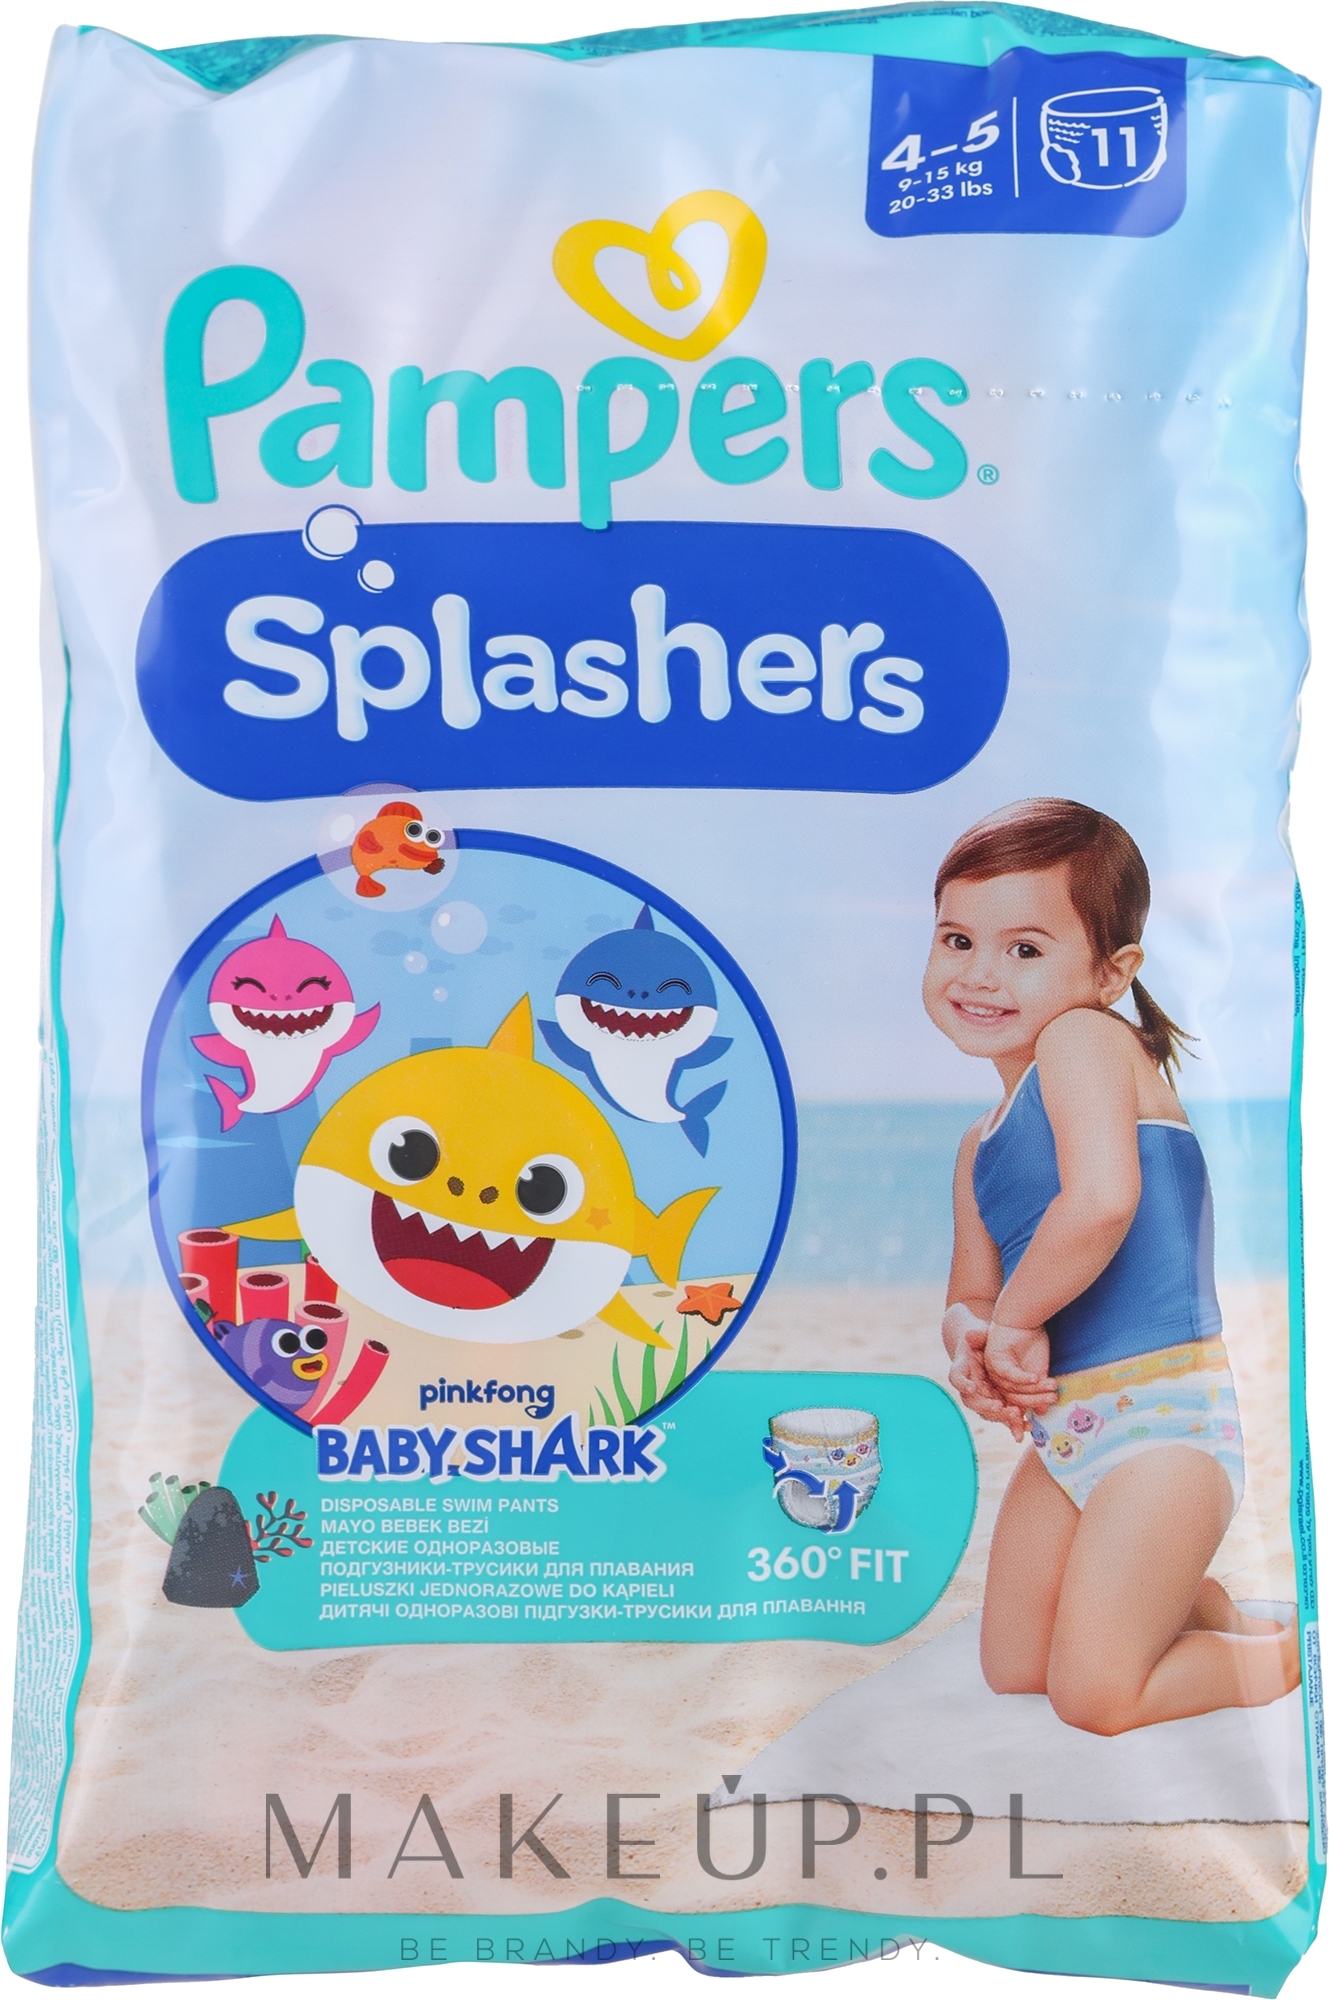 pampers giant pack 3 ceneo